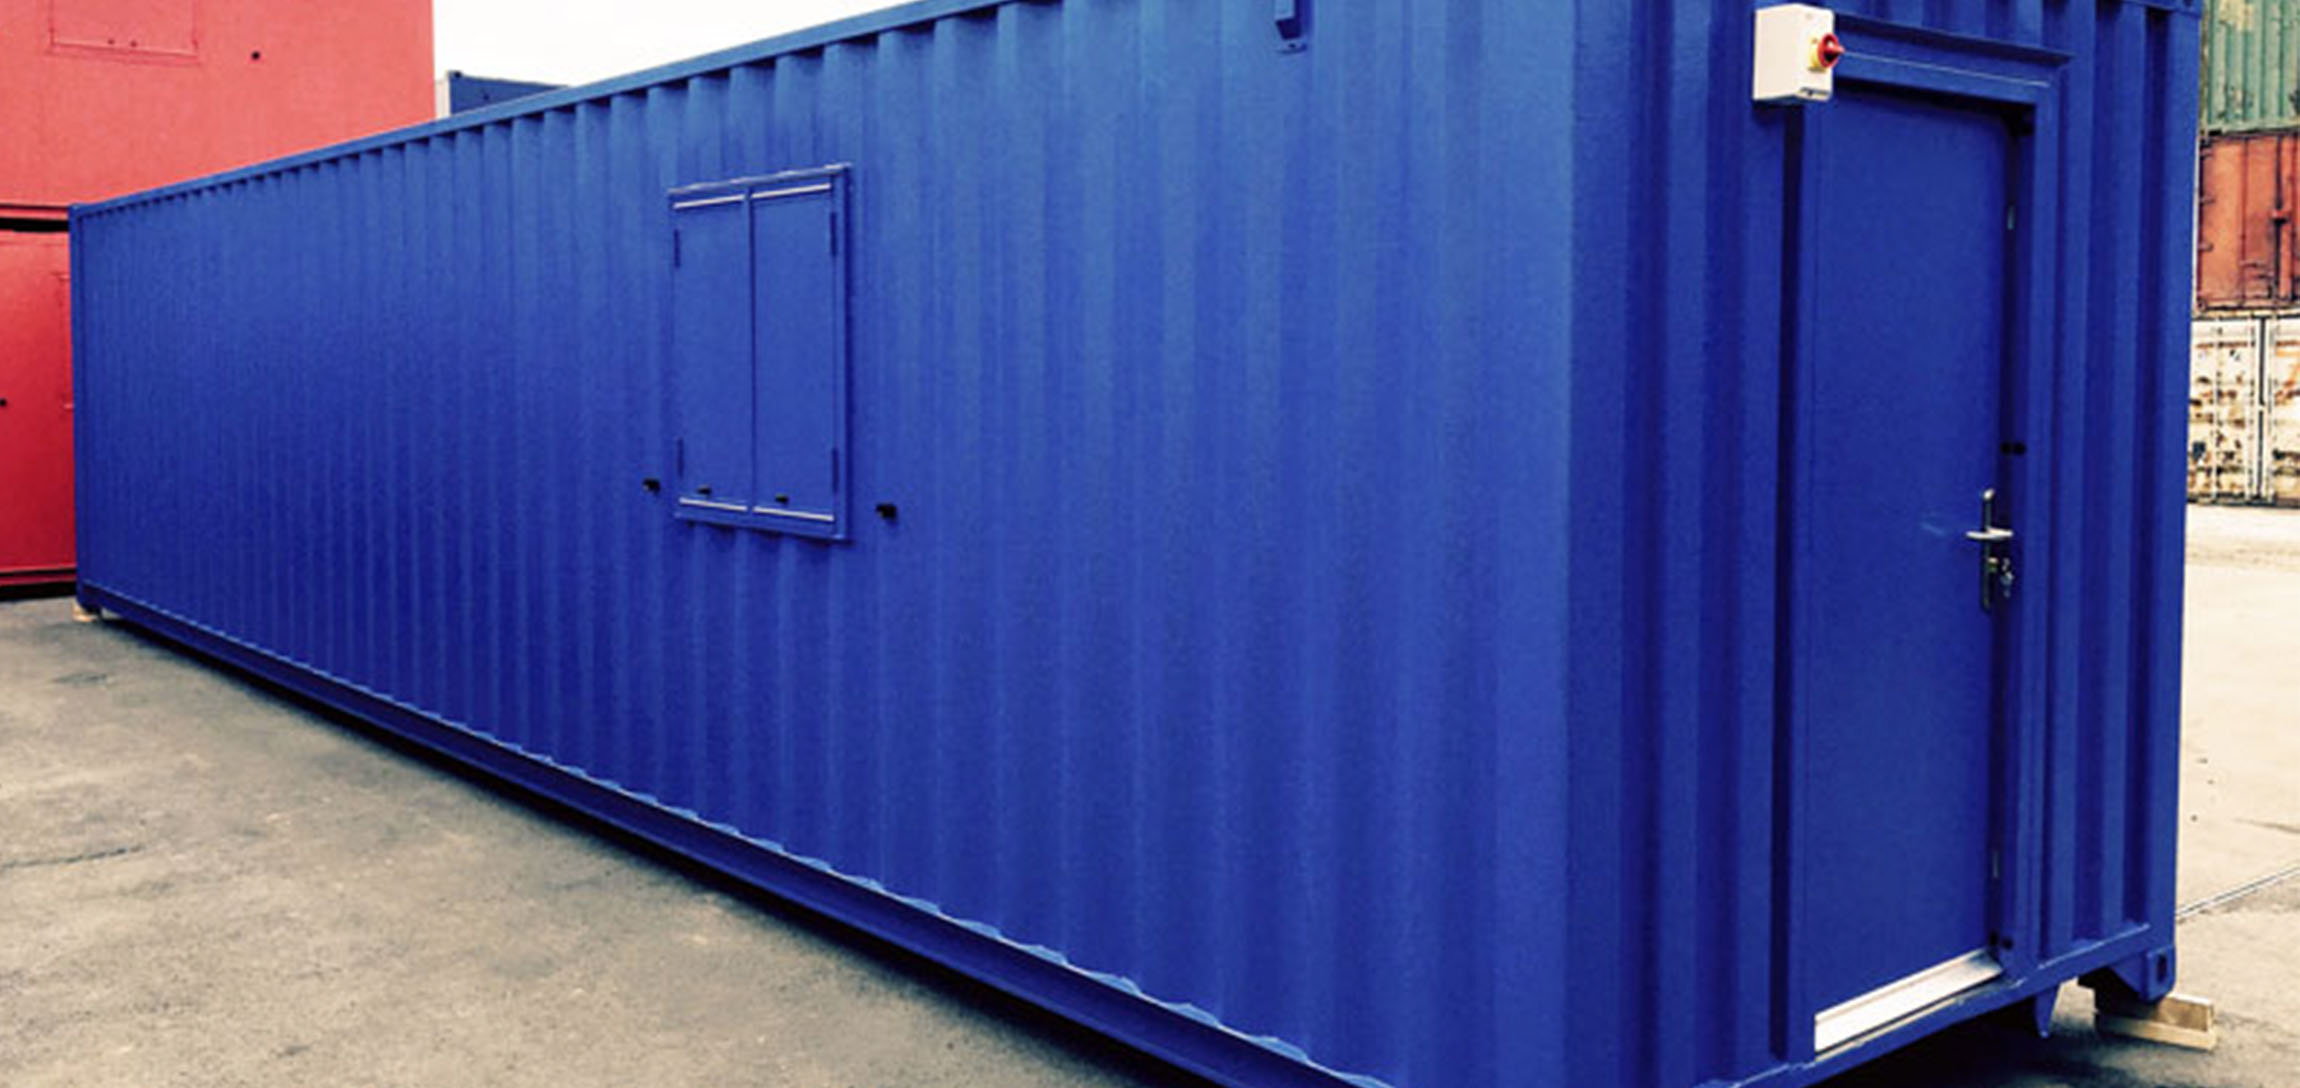 UK Suppliers of Bespoke Office Containers